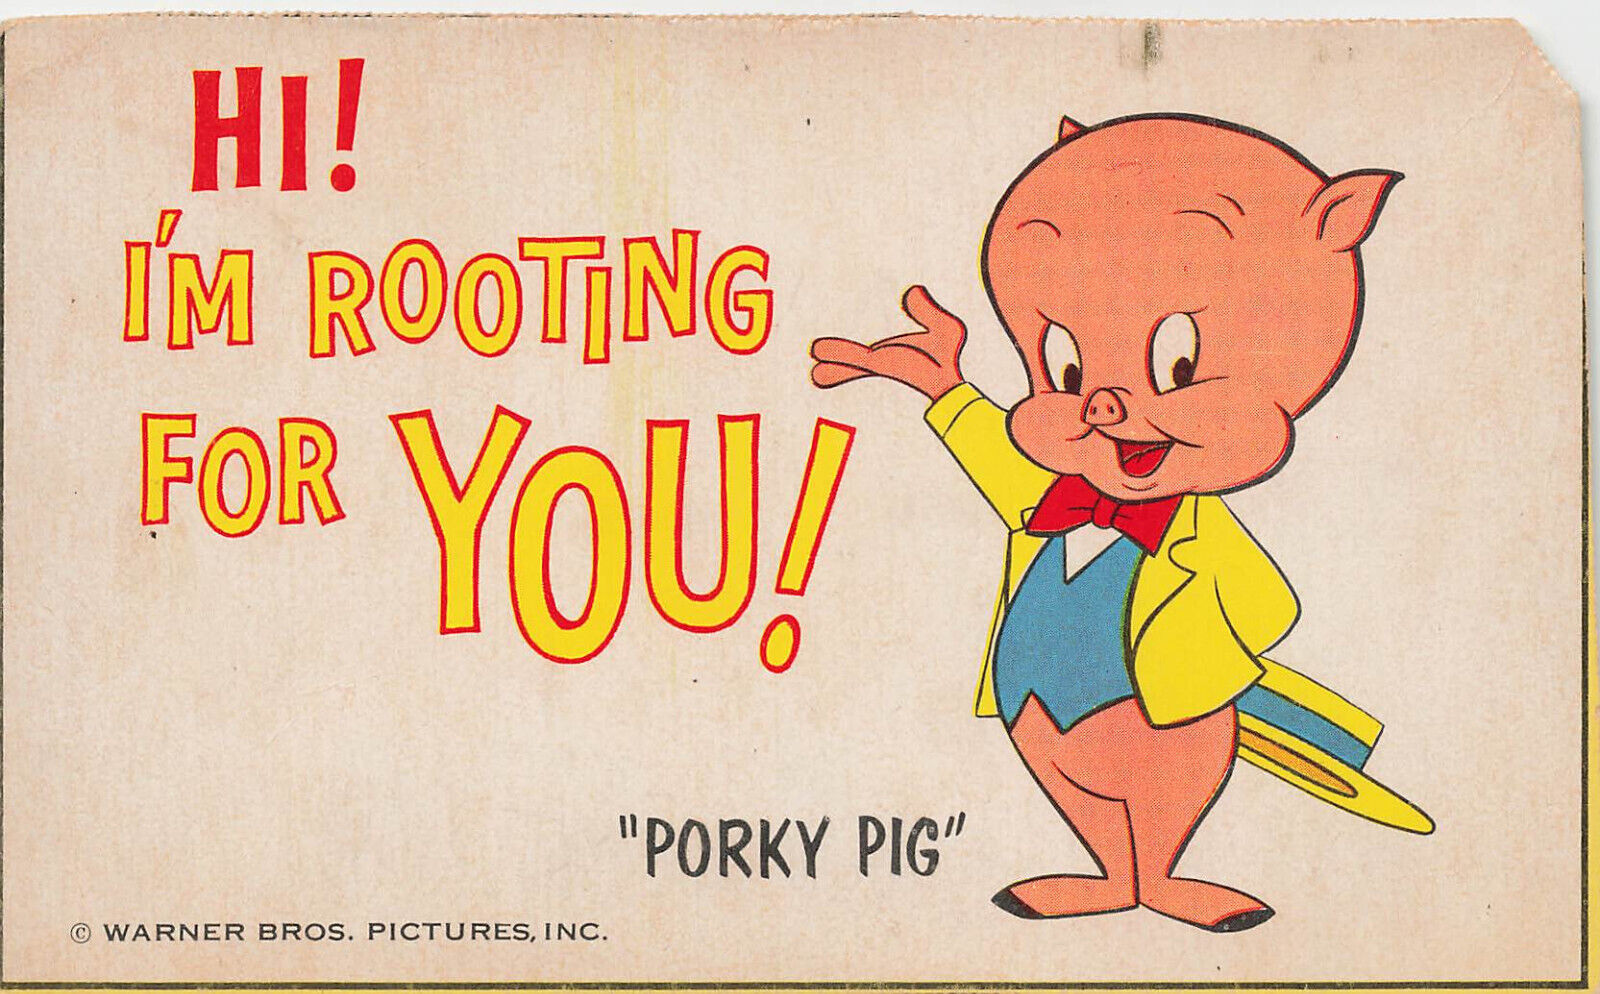 PORKY PIG IS ROOTING FOR YOU GREETING POSTCARD 1950s WARNER BROS PICTURES INC